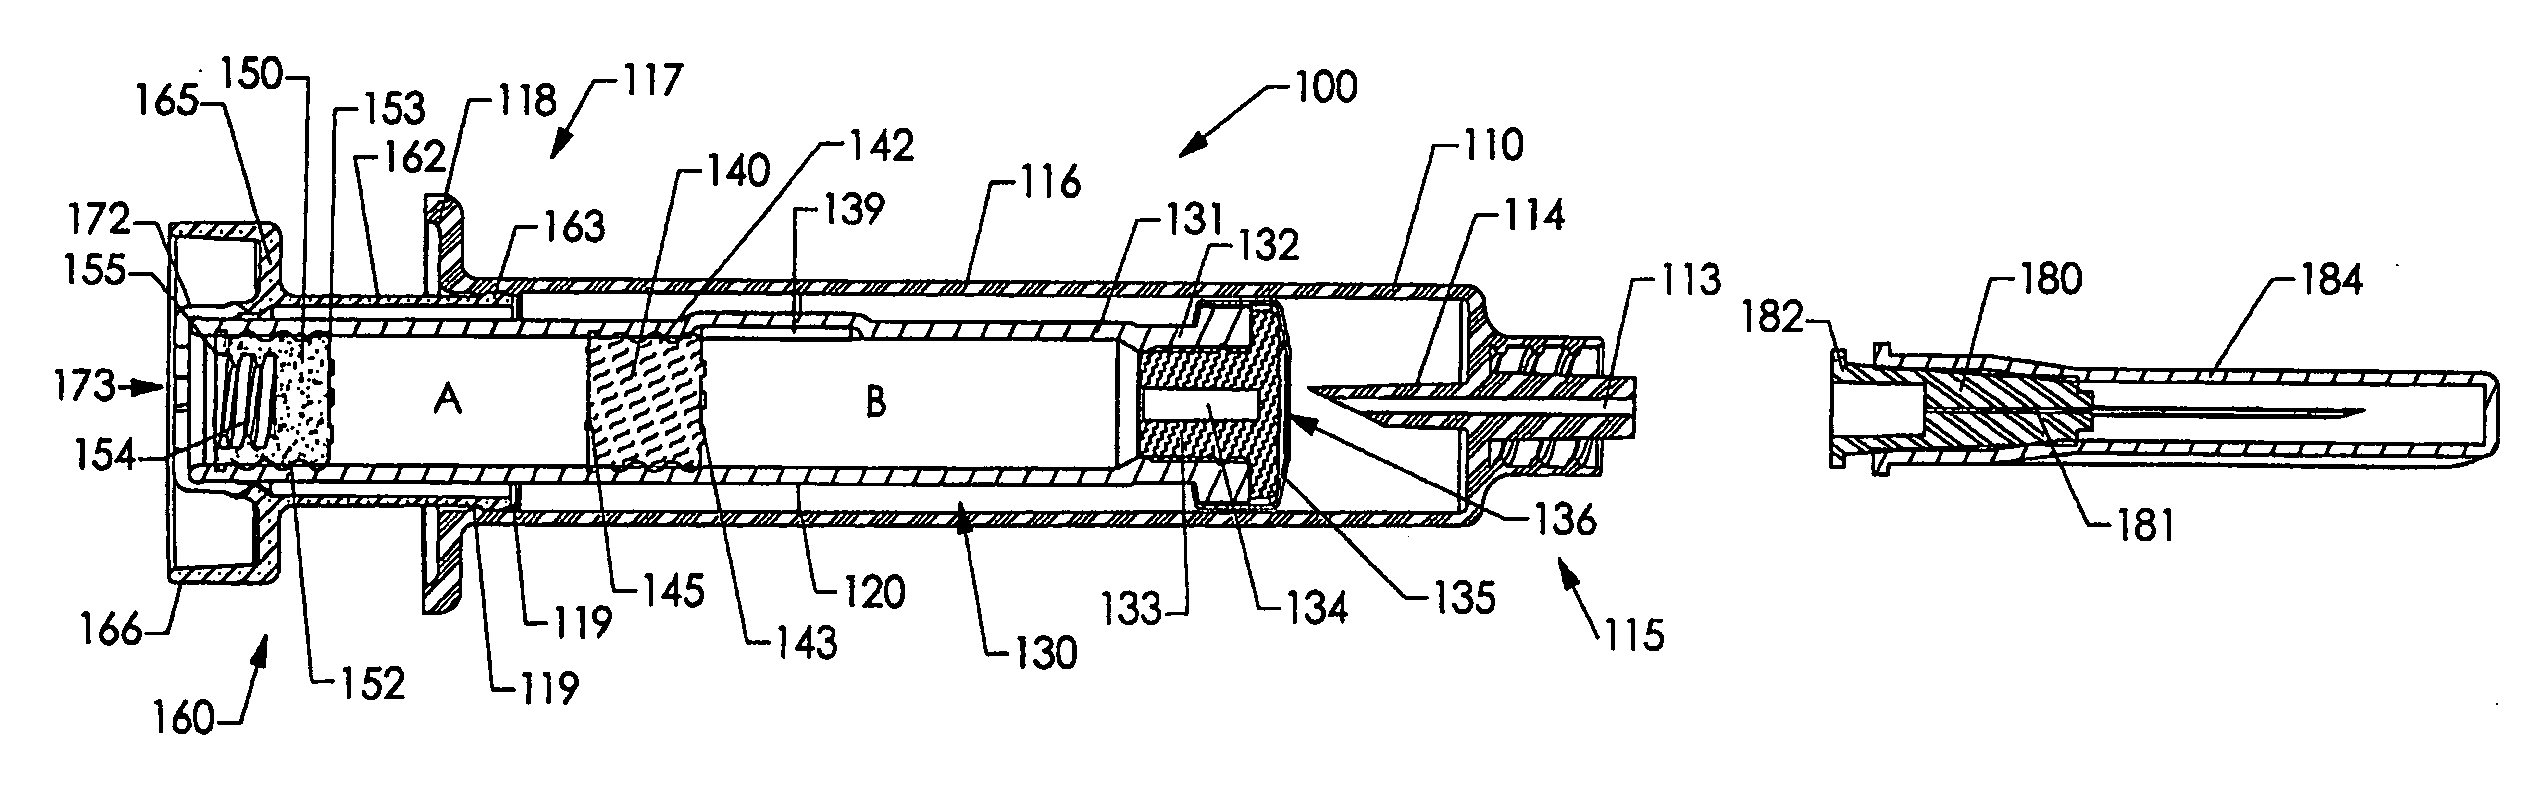 Device and method for pharmaceutical mixing and delivery